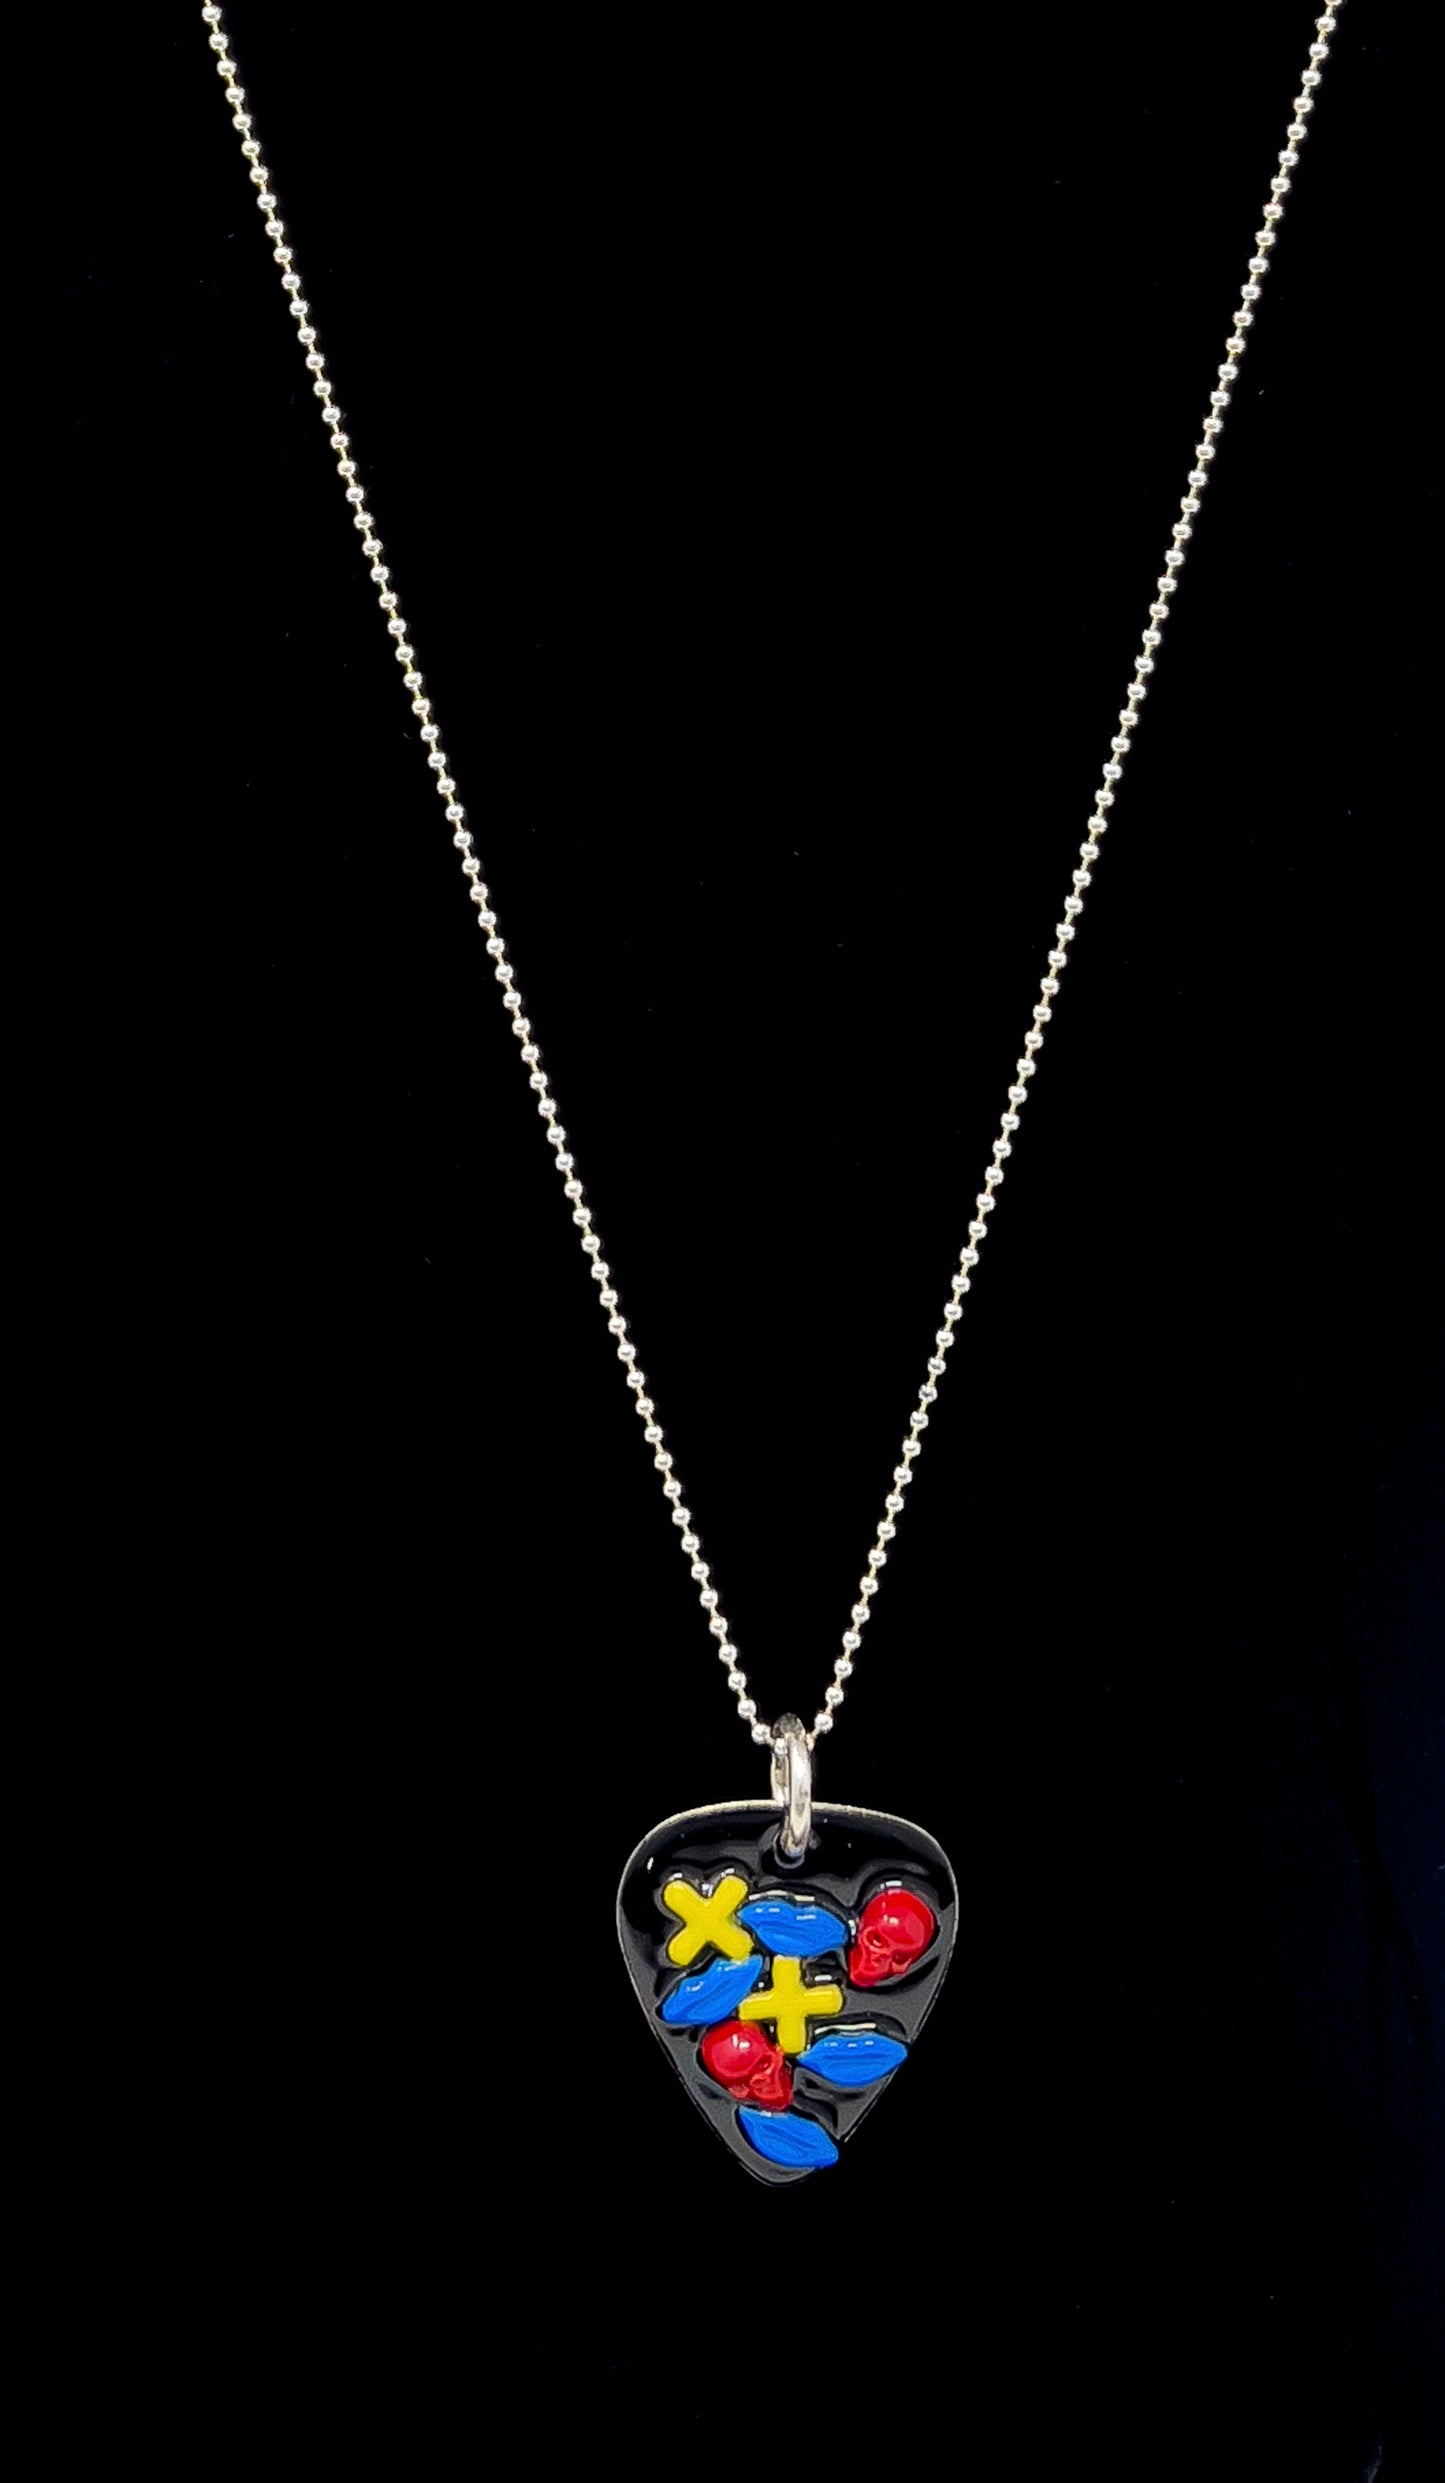 Rock 'N' Roll Kisses Enamel and Solid Sterling Silver Guitar Pick XOXO with Solid Sterling Silver Chain